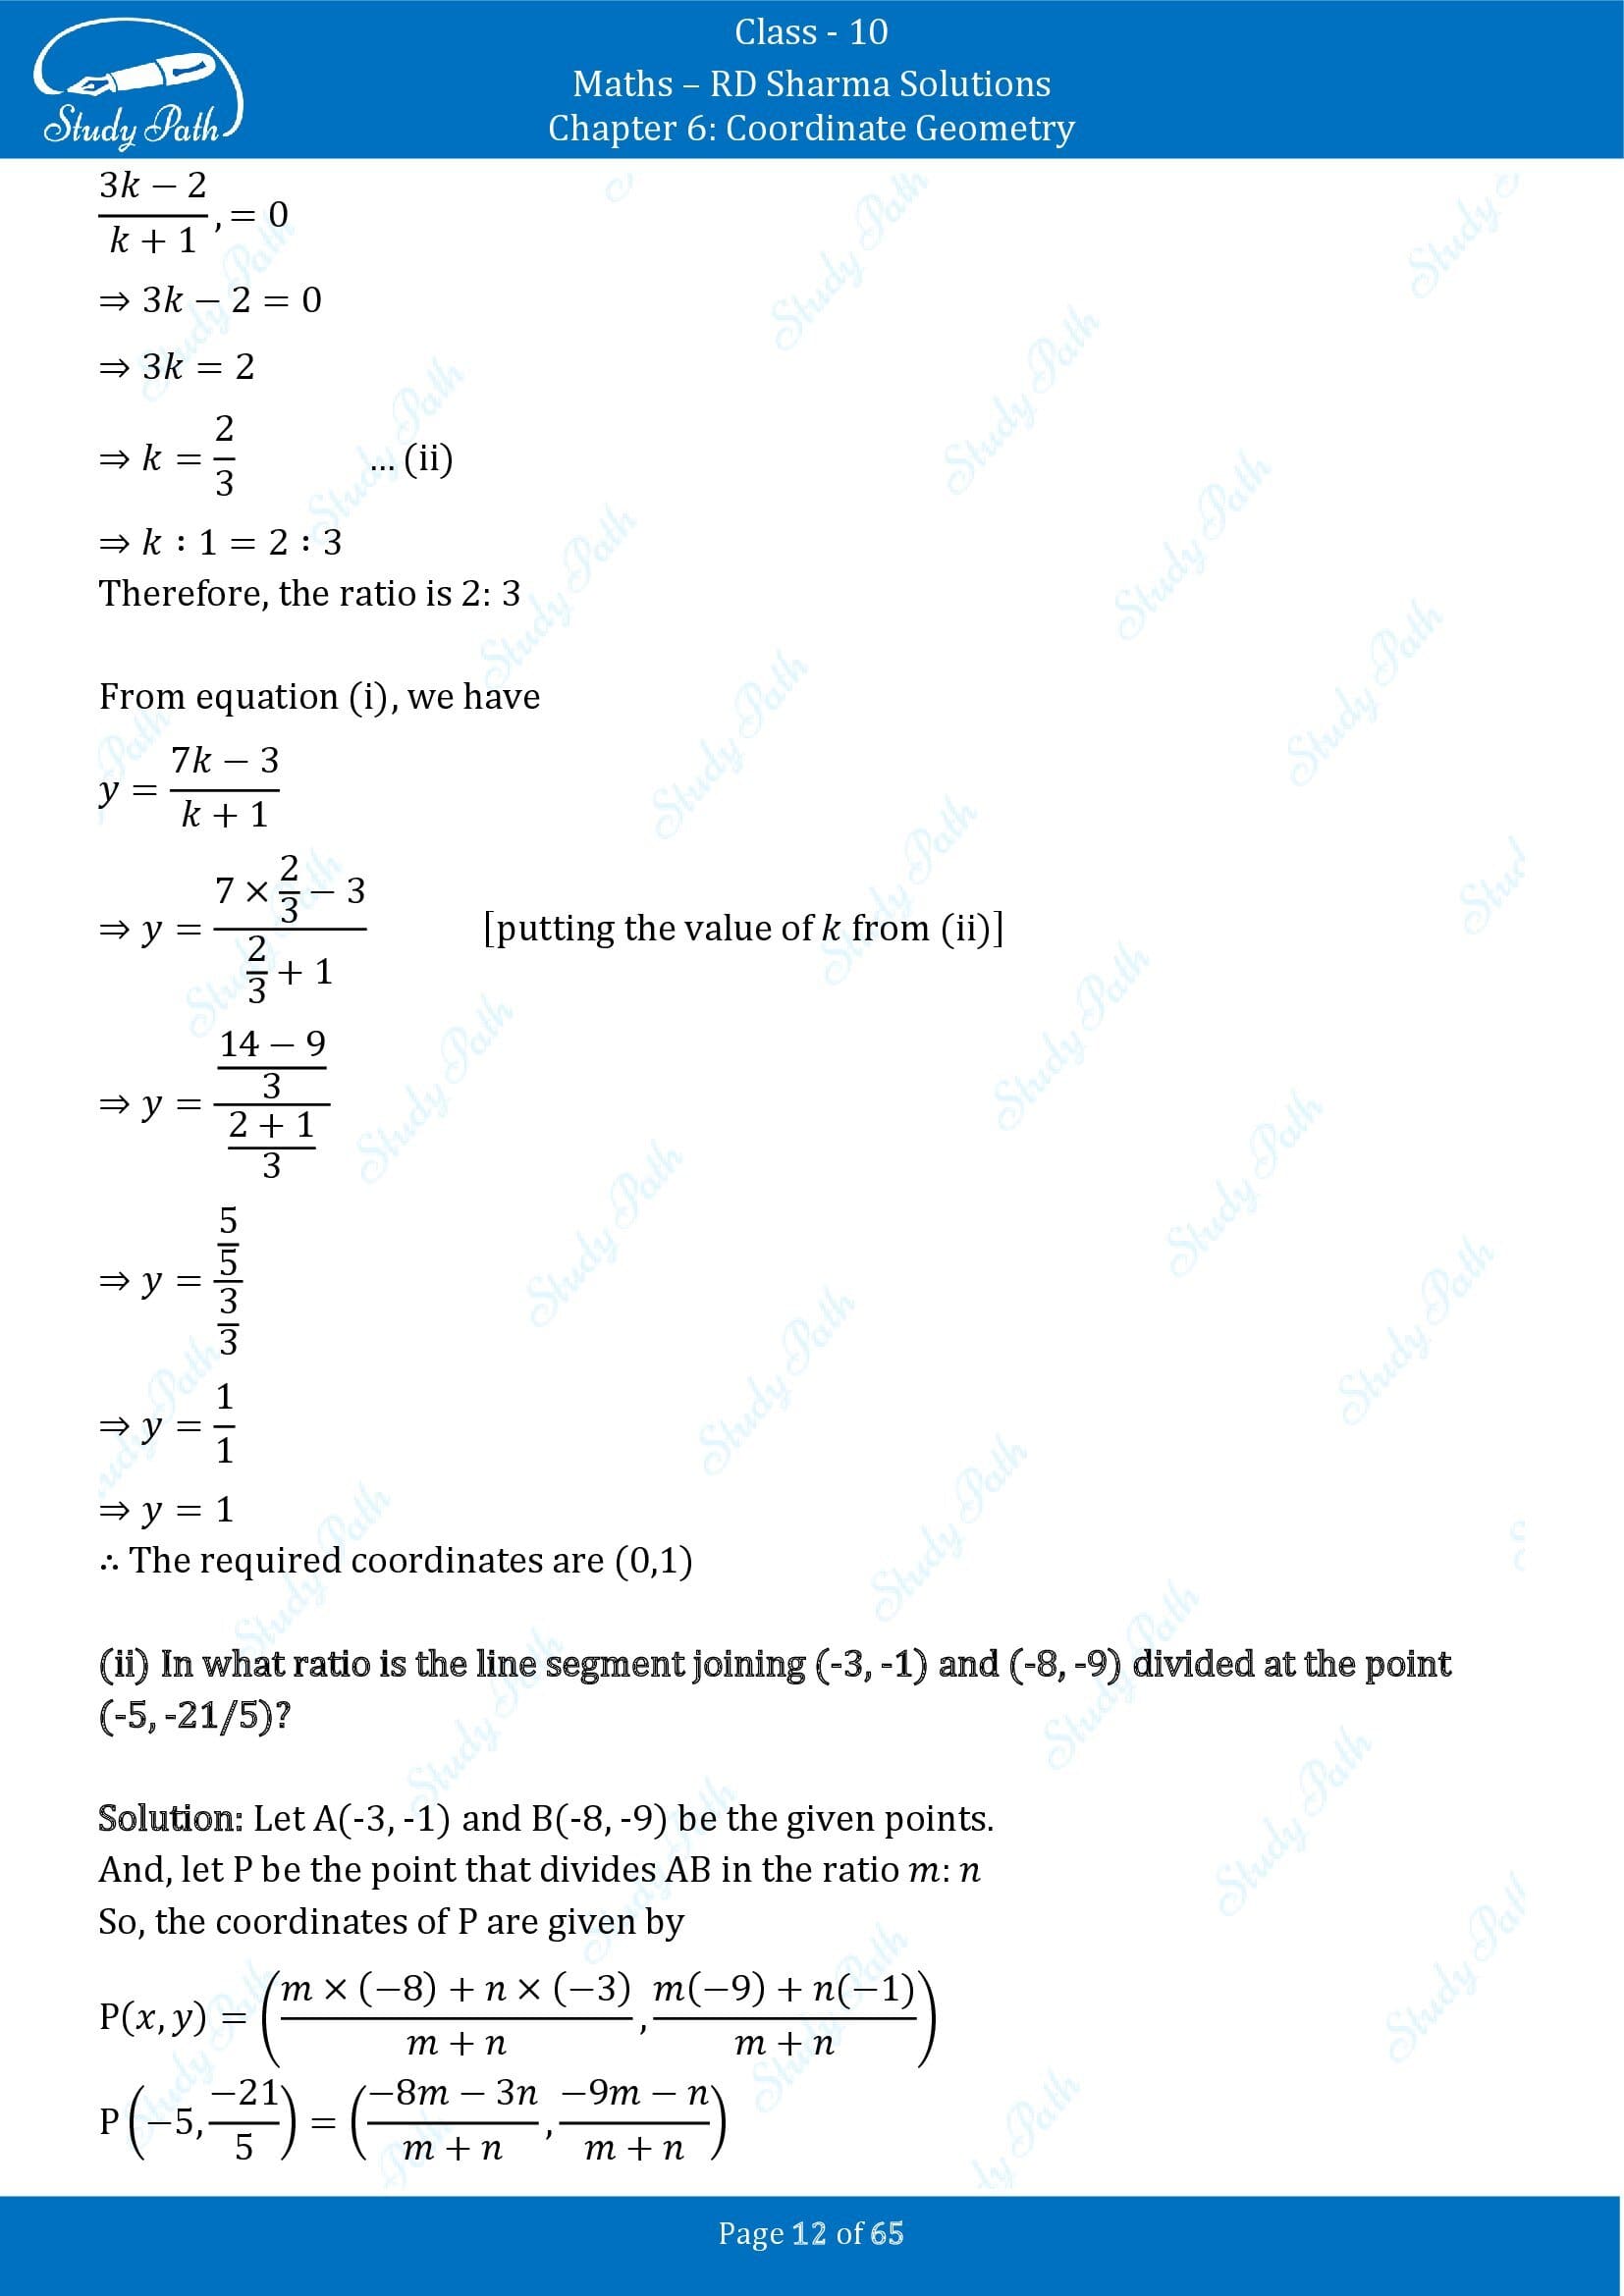 RD Sharma Solutions Class 10 Chapter 6 Coordinate Geometry Exercise 6.3 00012